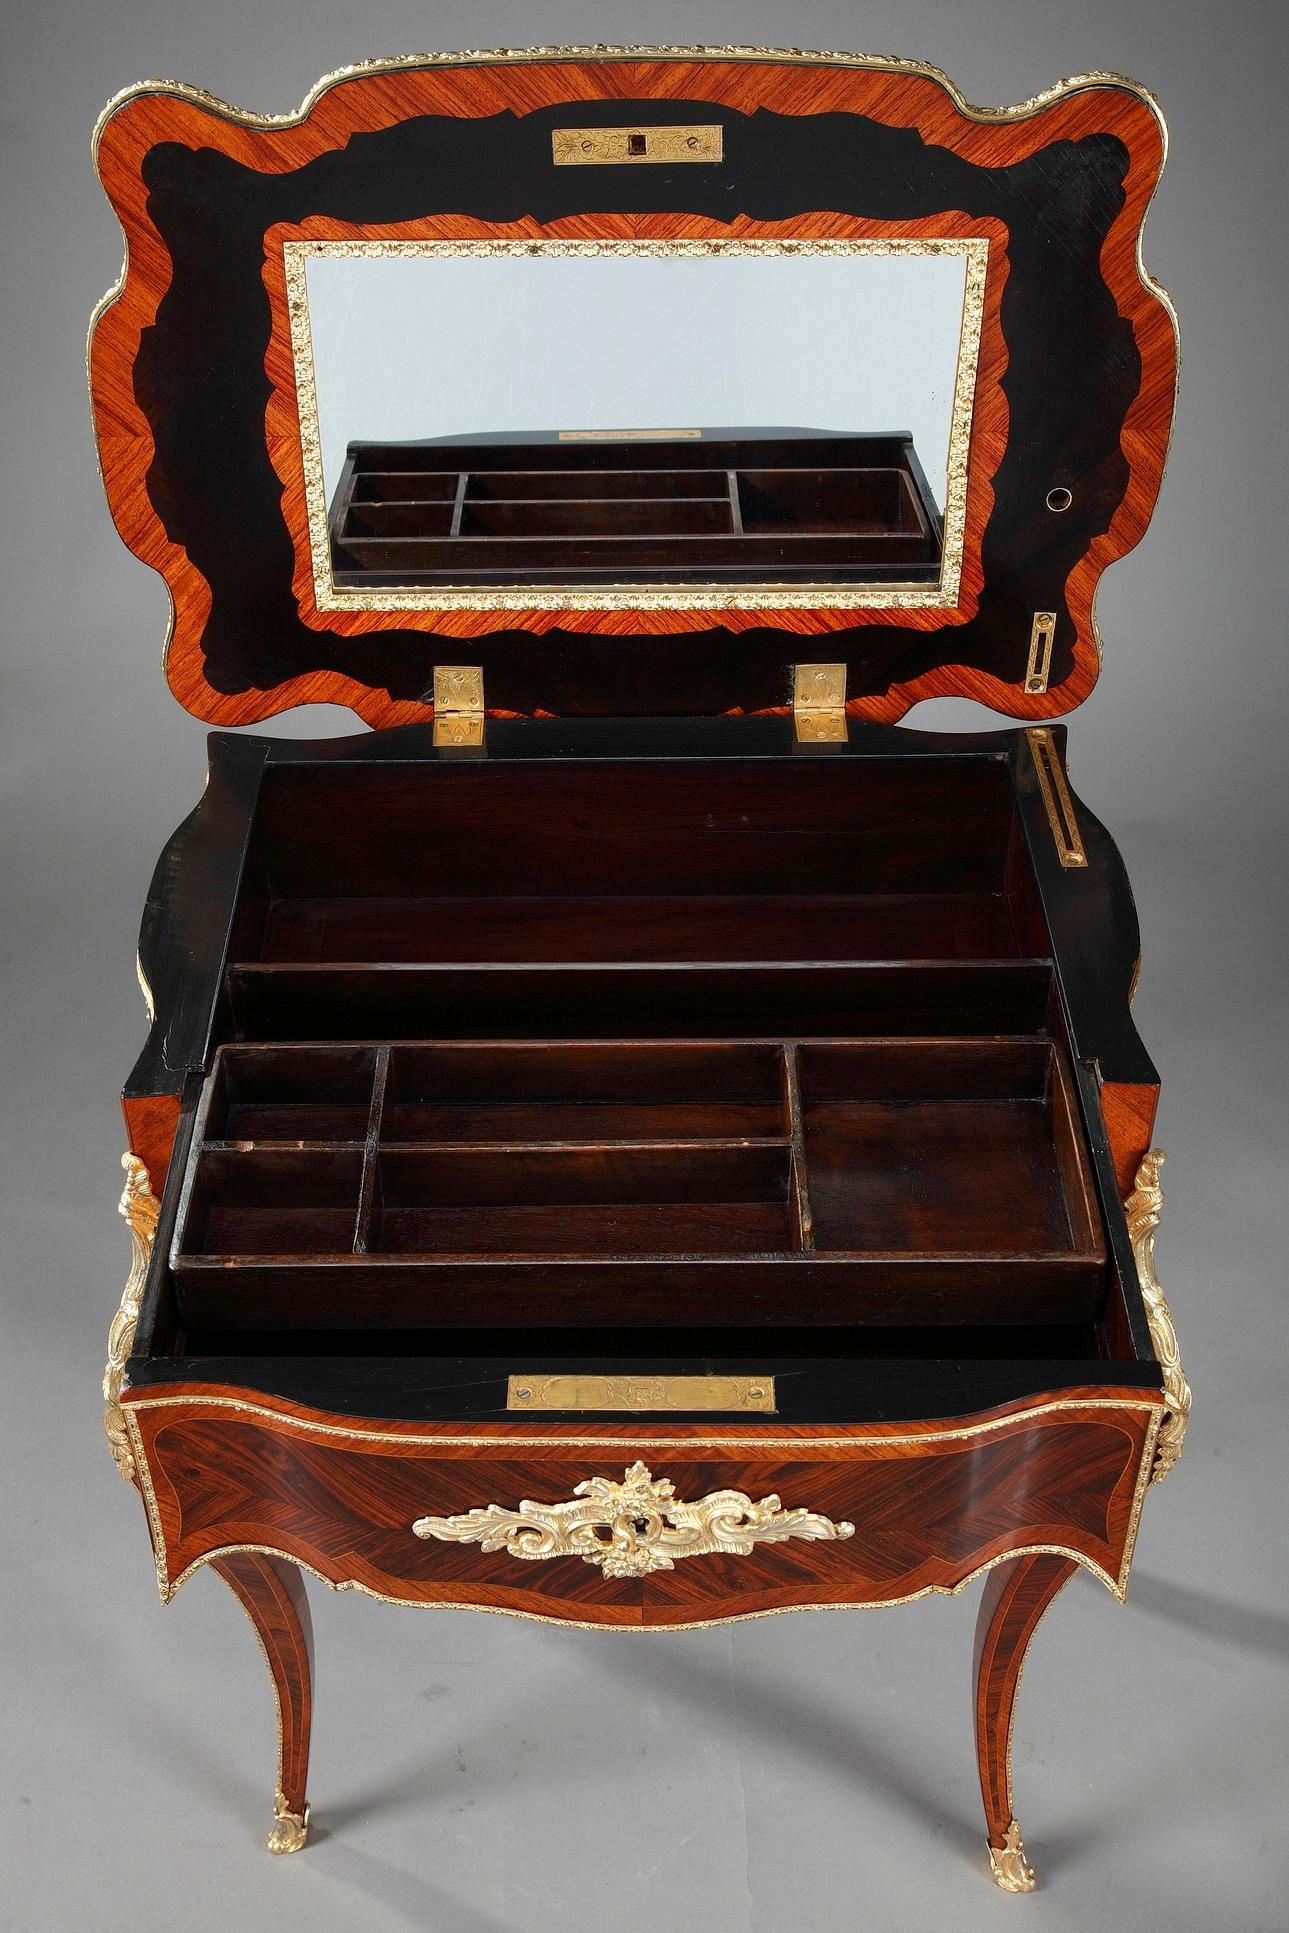 19th Century Dressing Table in Exotic Wood Veneers and Marquetry in Louis XV Style